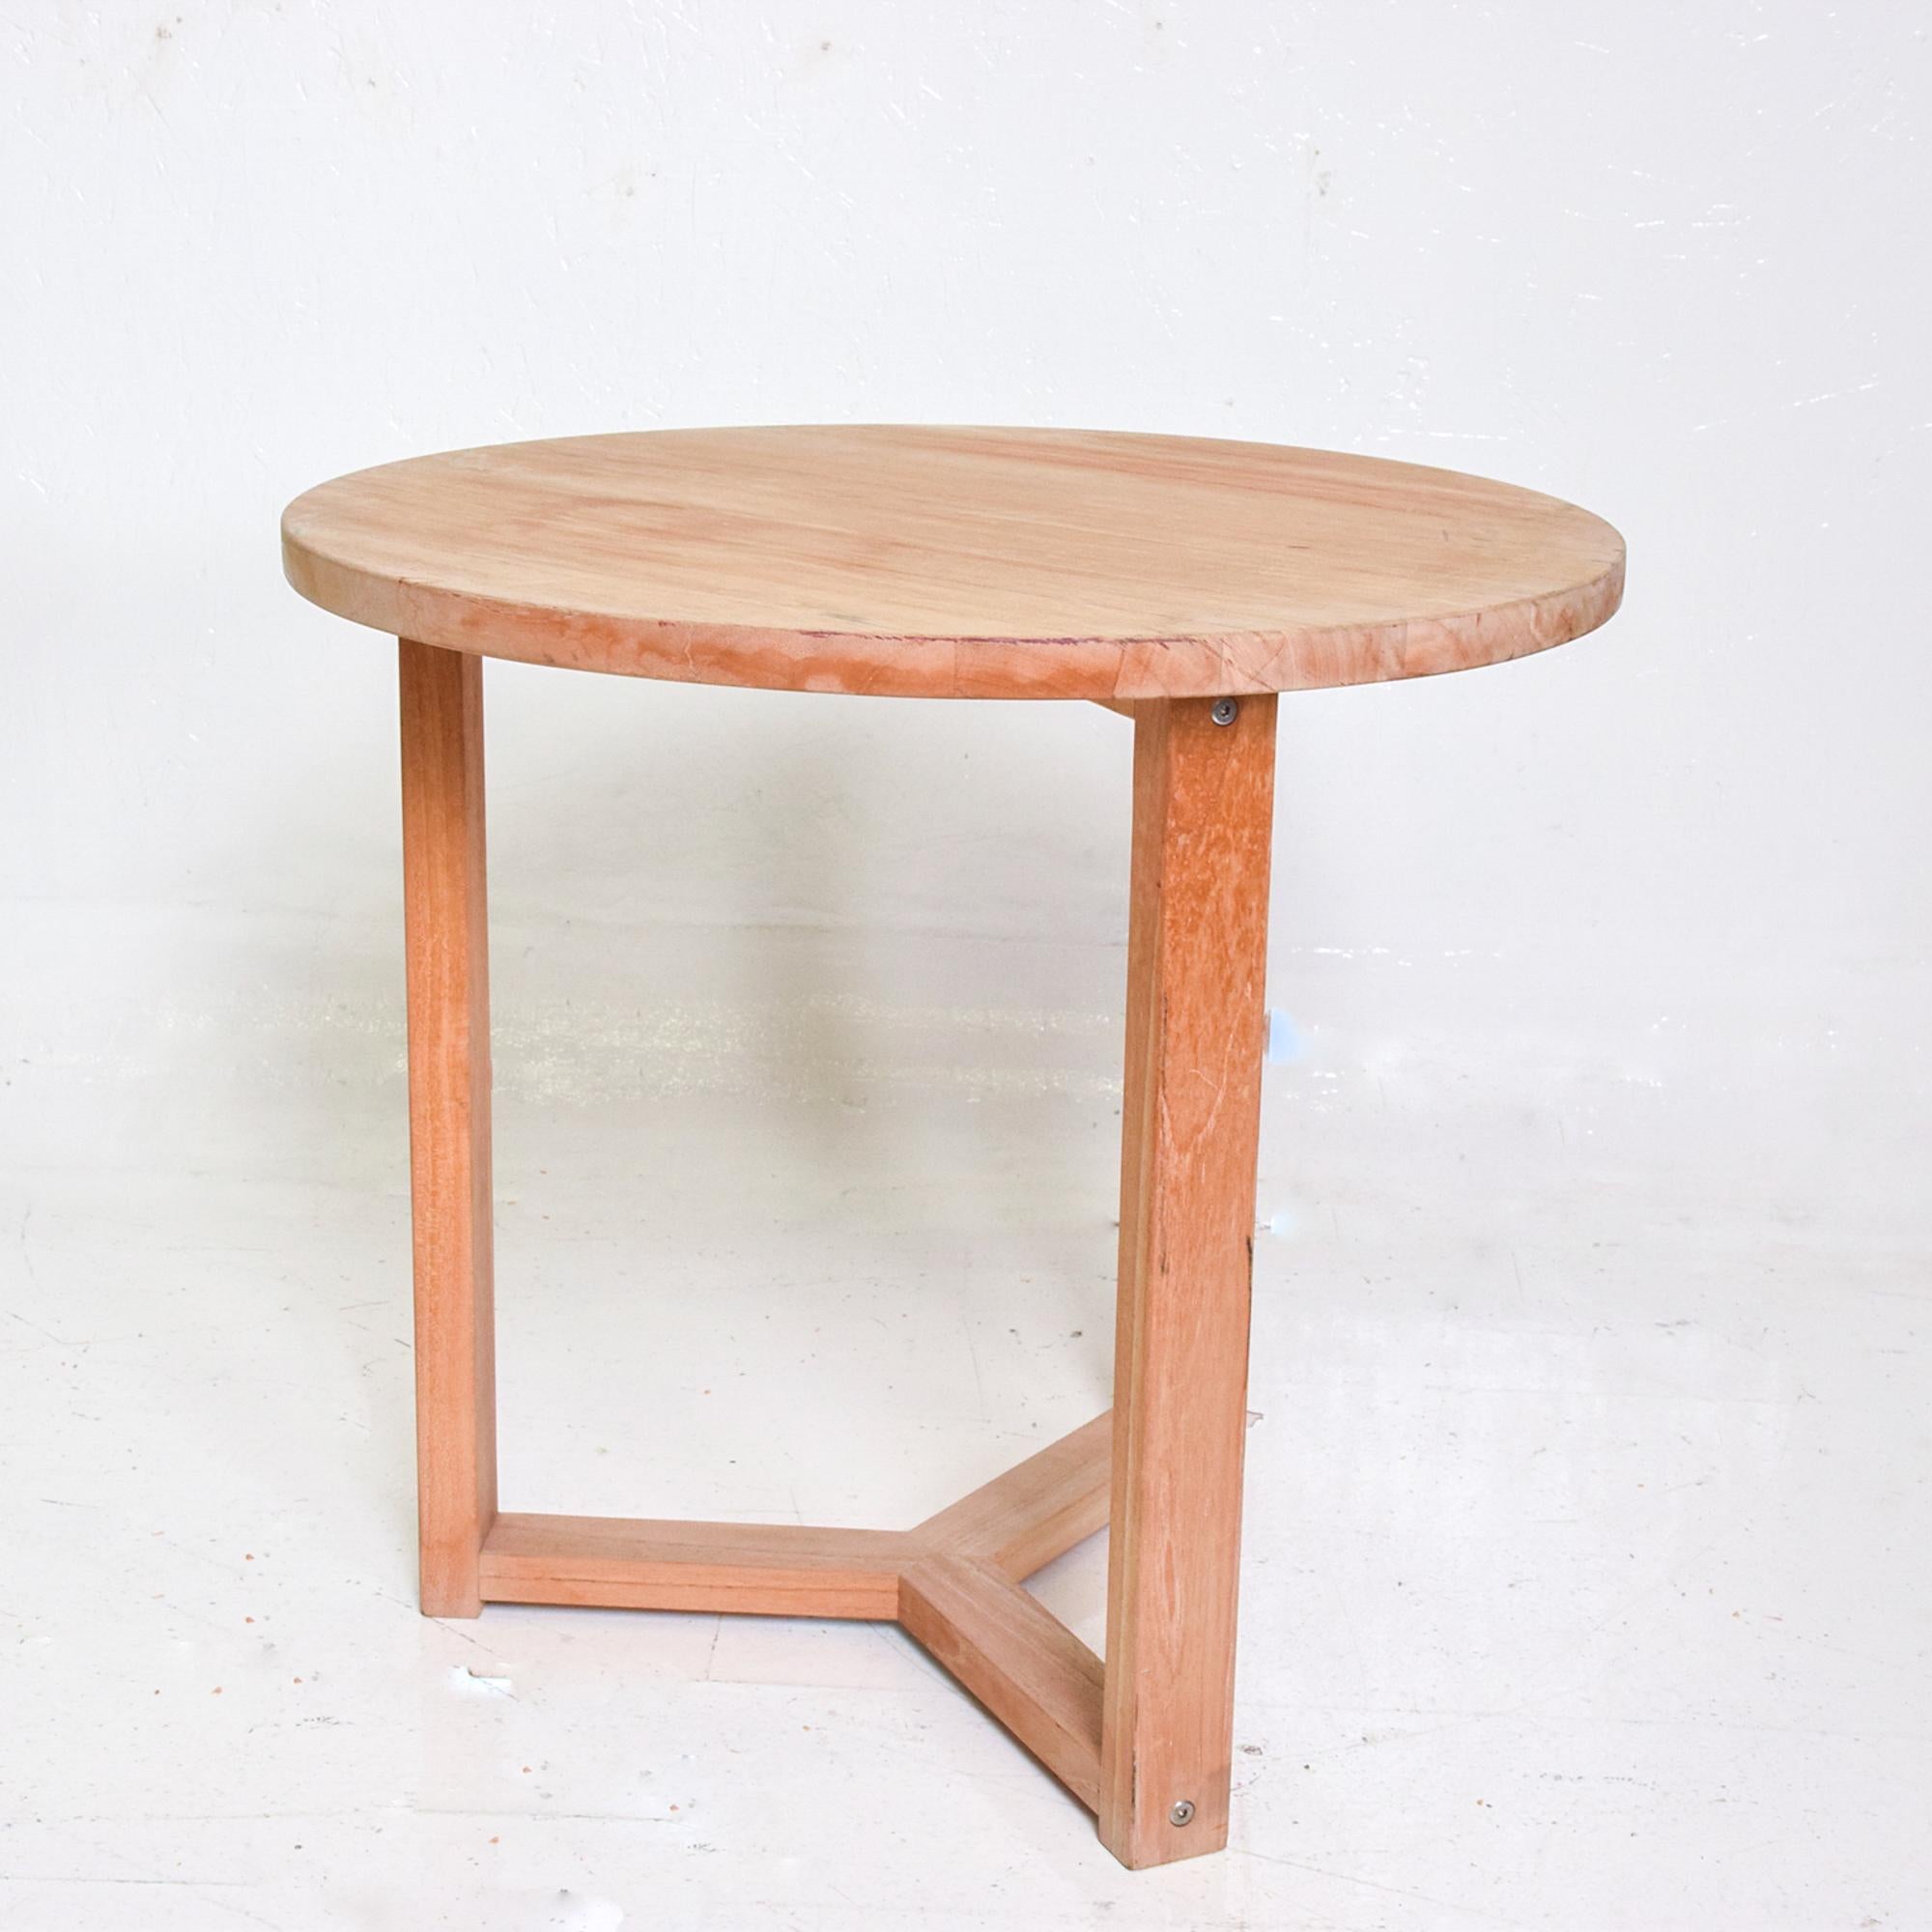 Modern Scandinavian teak round side table. Clean modern lines. Solid Teakwood. Triangular base support.
Attributed to style of McGuire of San Francisco California circa 1990s
No label present from the maker.
Dimensions: 21.5 tall x 23.5 in